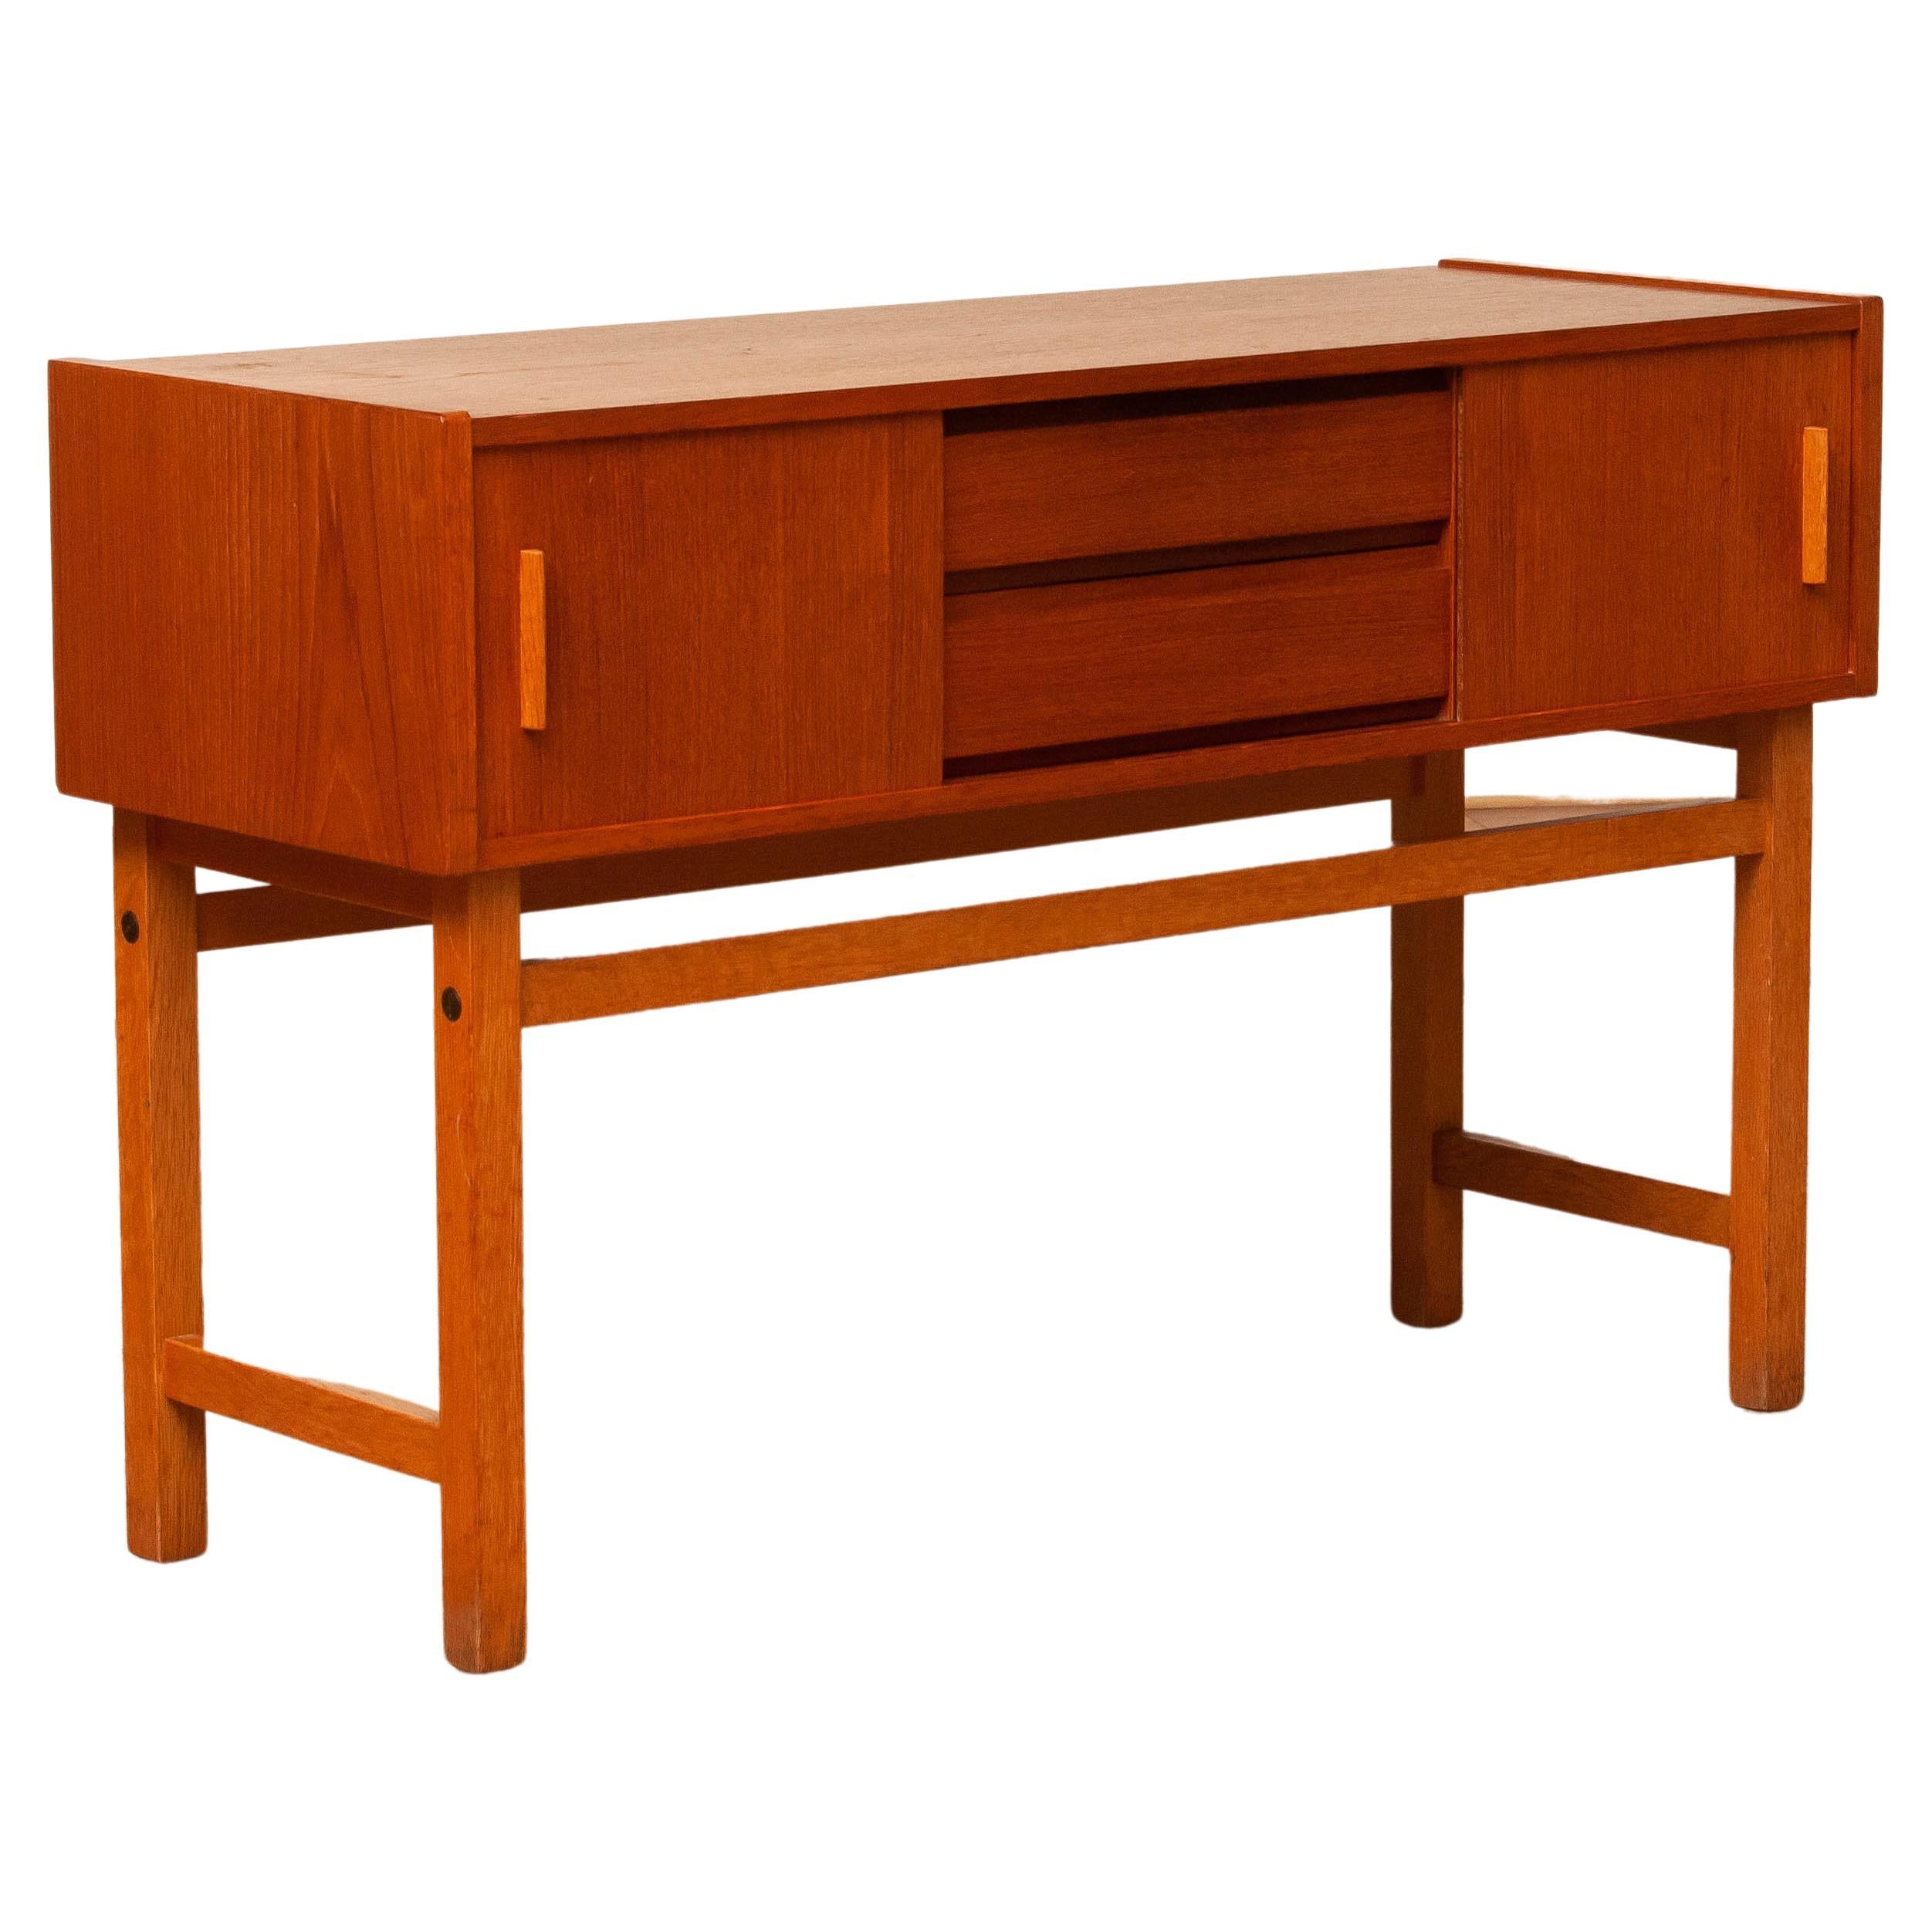 1960s Teak Cabinet / Credenzas / Console With Drawers And Sliding Doors. Sweden.